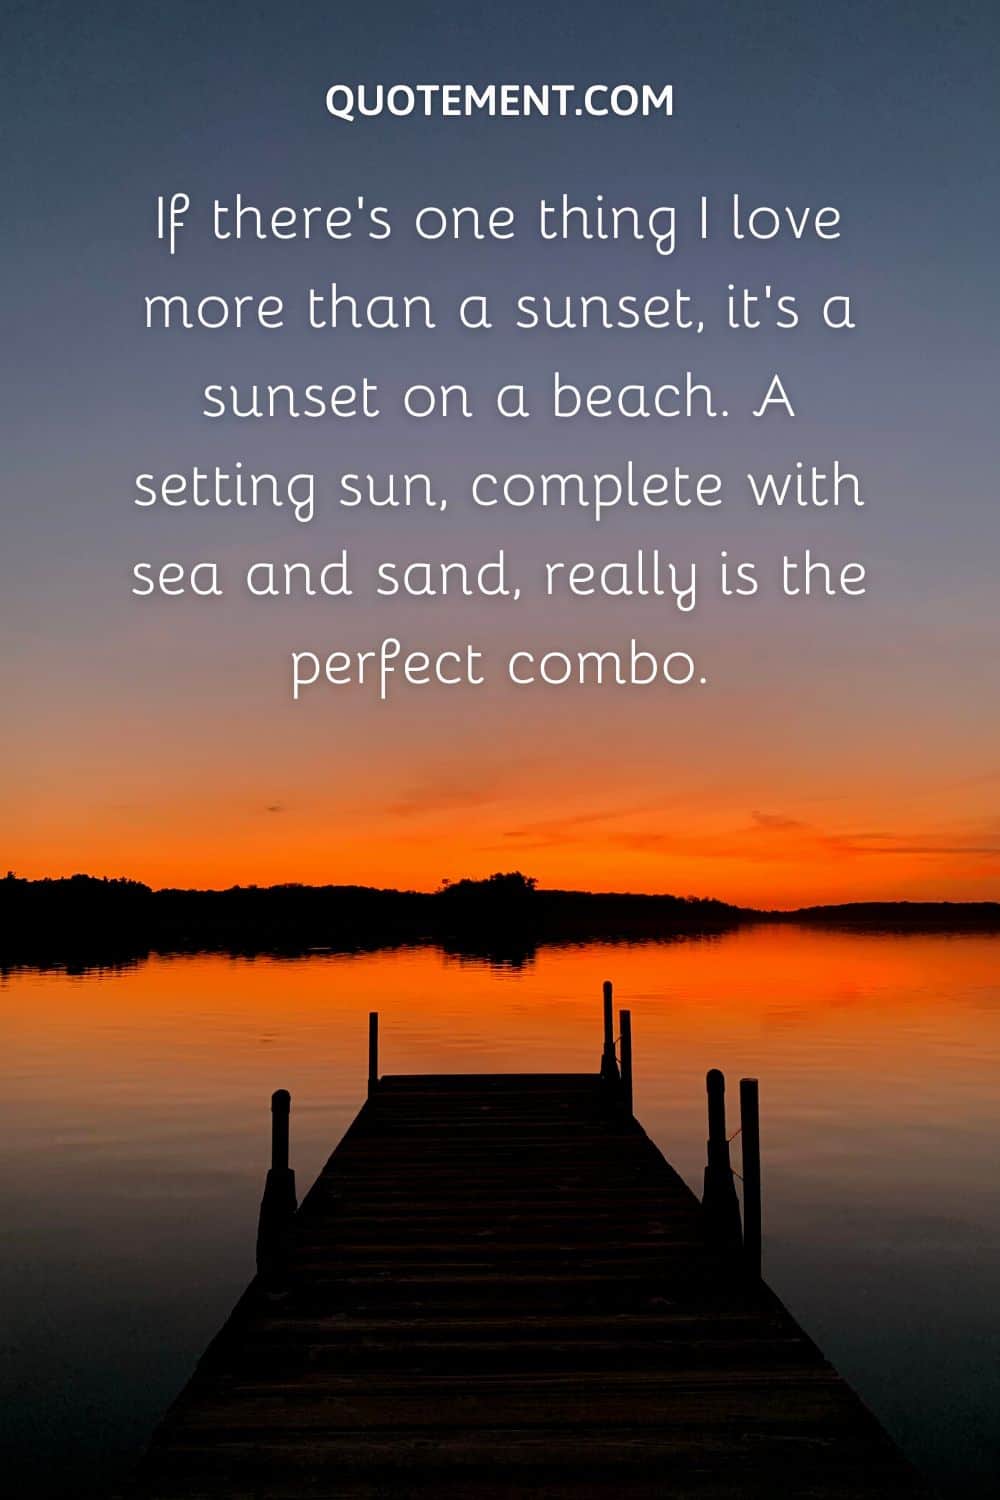 If there’s one thing I love more than a sunset, it’s a sunset on a beach. A setting sun, complete with sea and sand, really is the perfect combo.